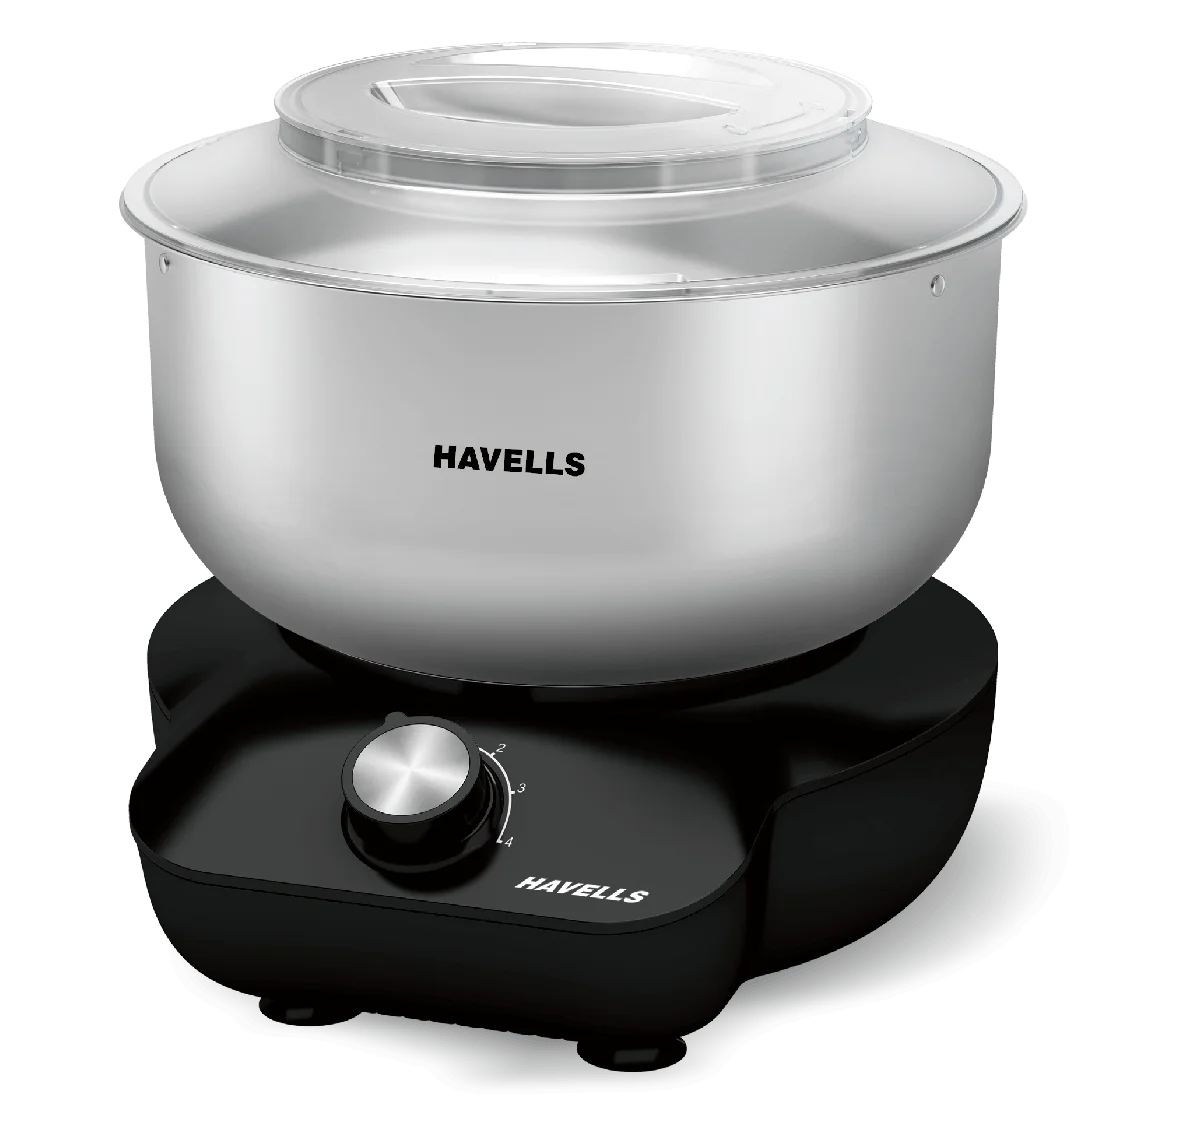 Havells Cooking Appliances Coimbatore